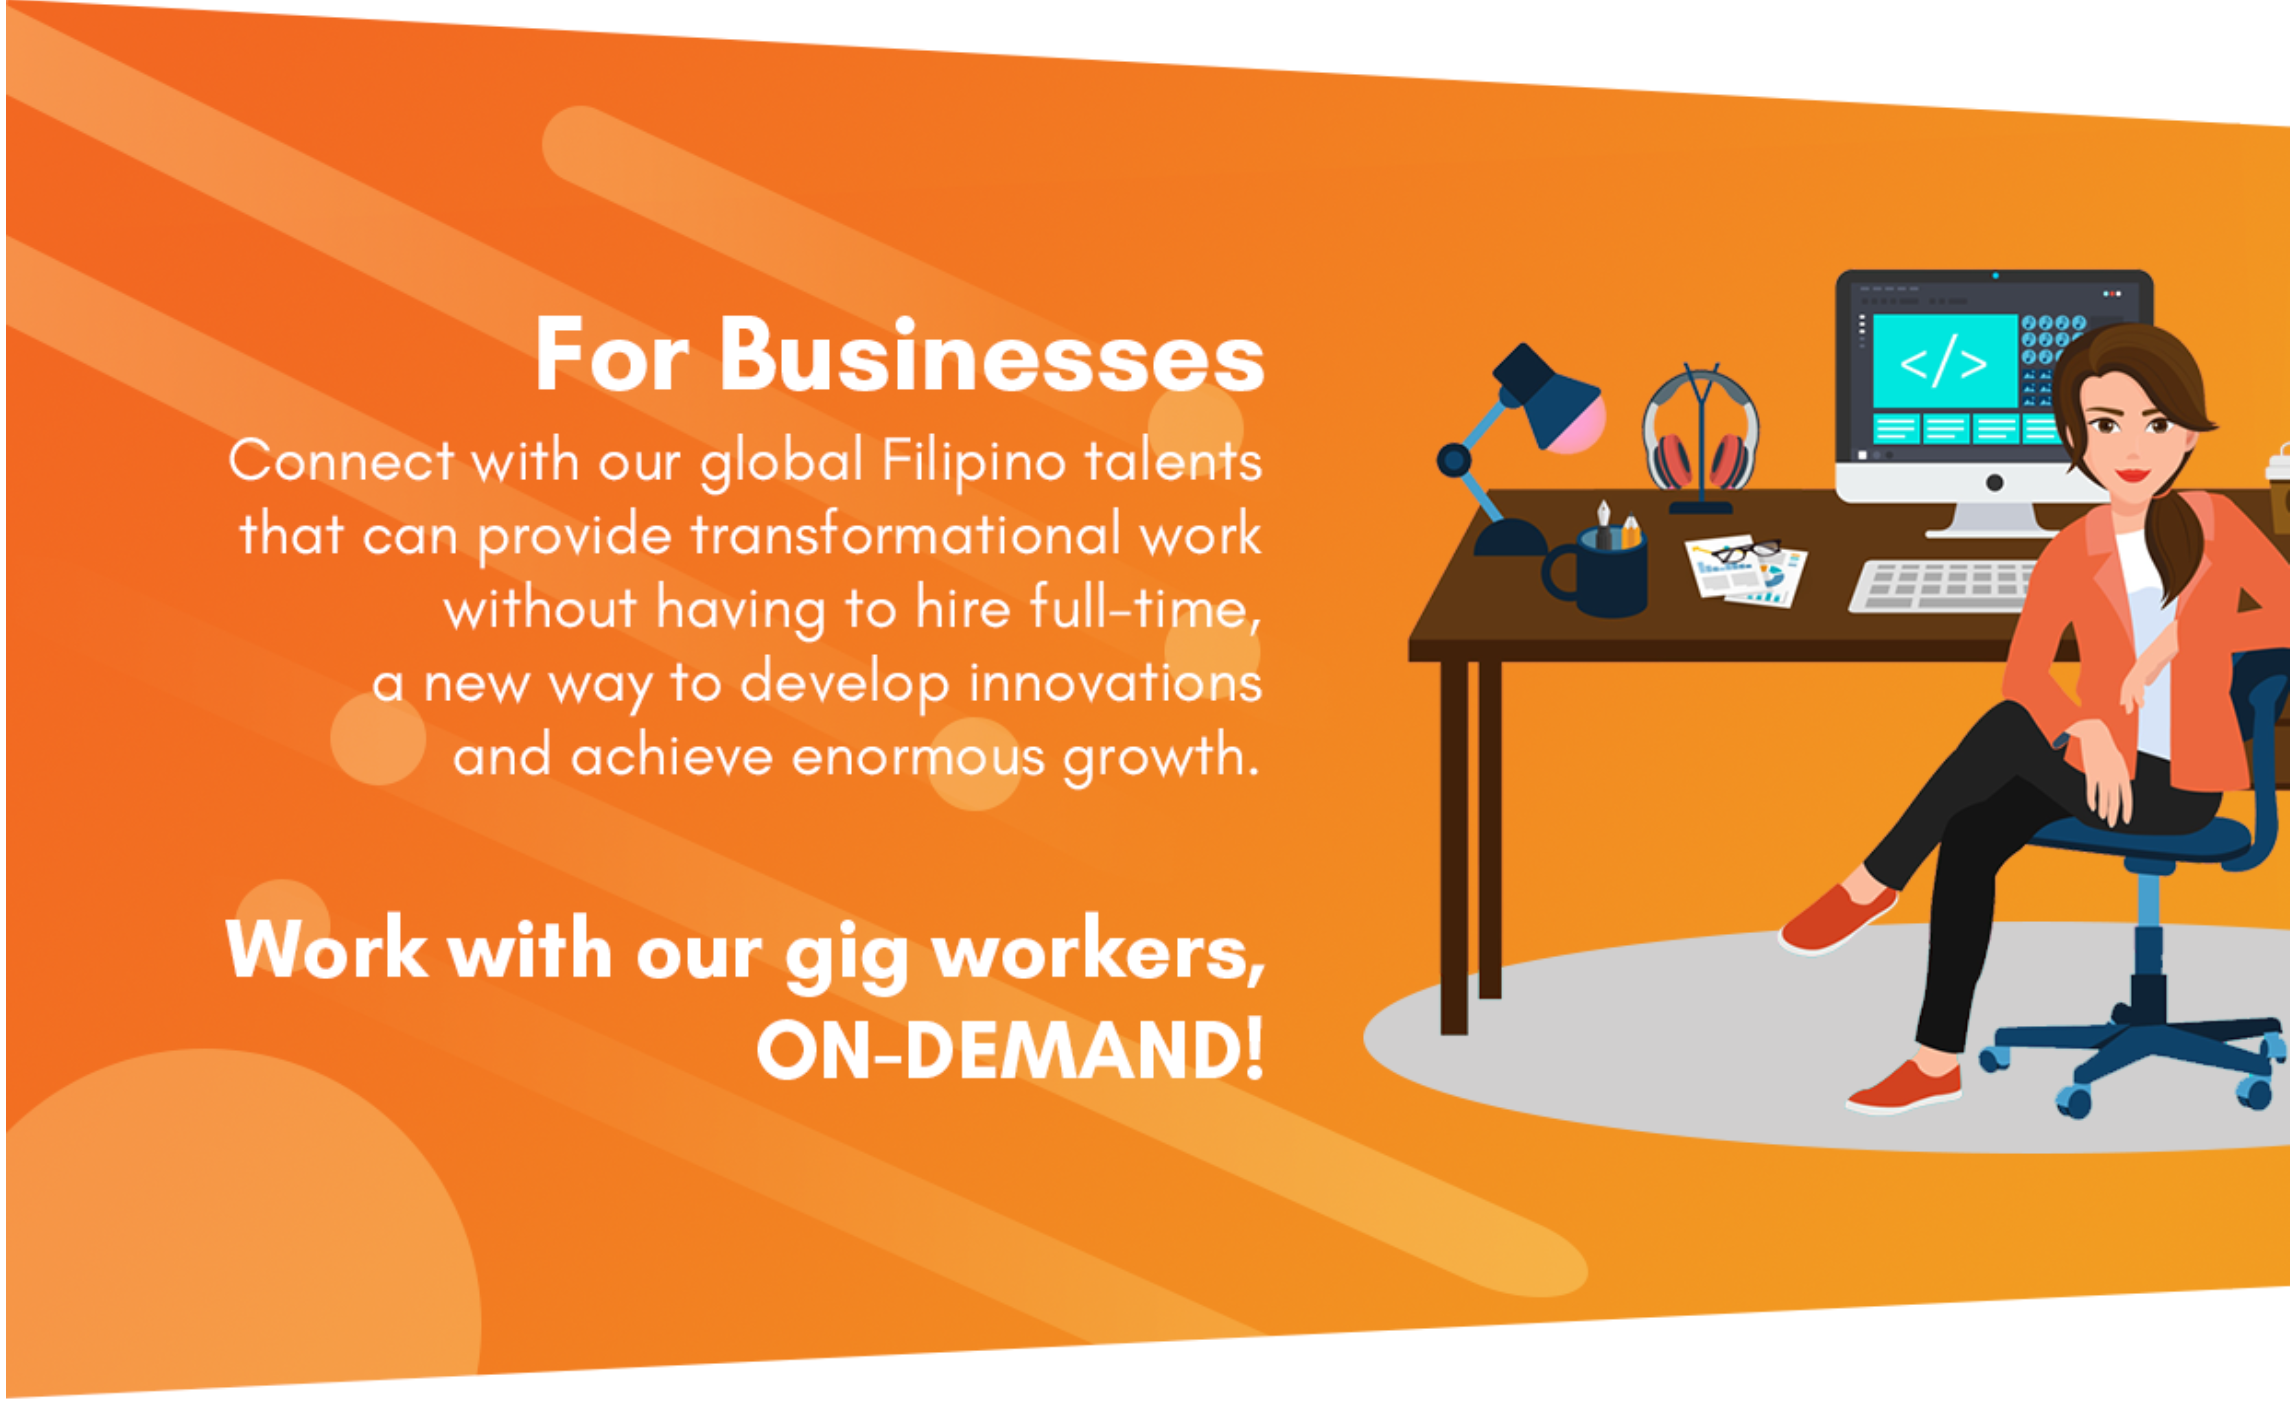 For Businesses Connect with our global Filipino talents that can provide transformational work without having to hire full-time, a new way to develop innovations and achieve enormous growth. Work with our gig workers ON-DEMAND!